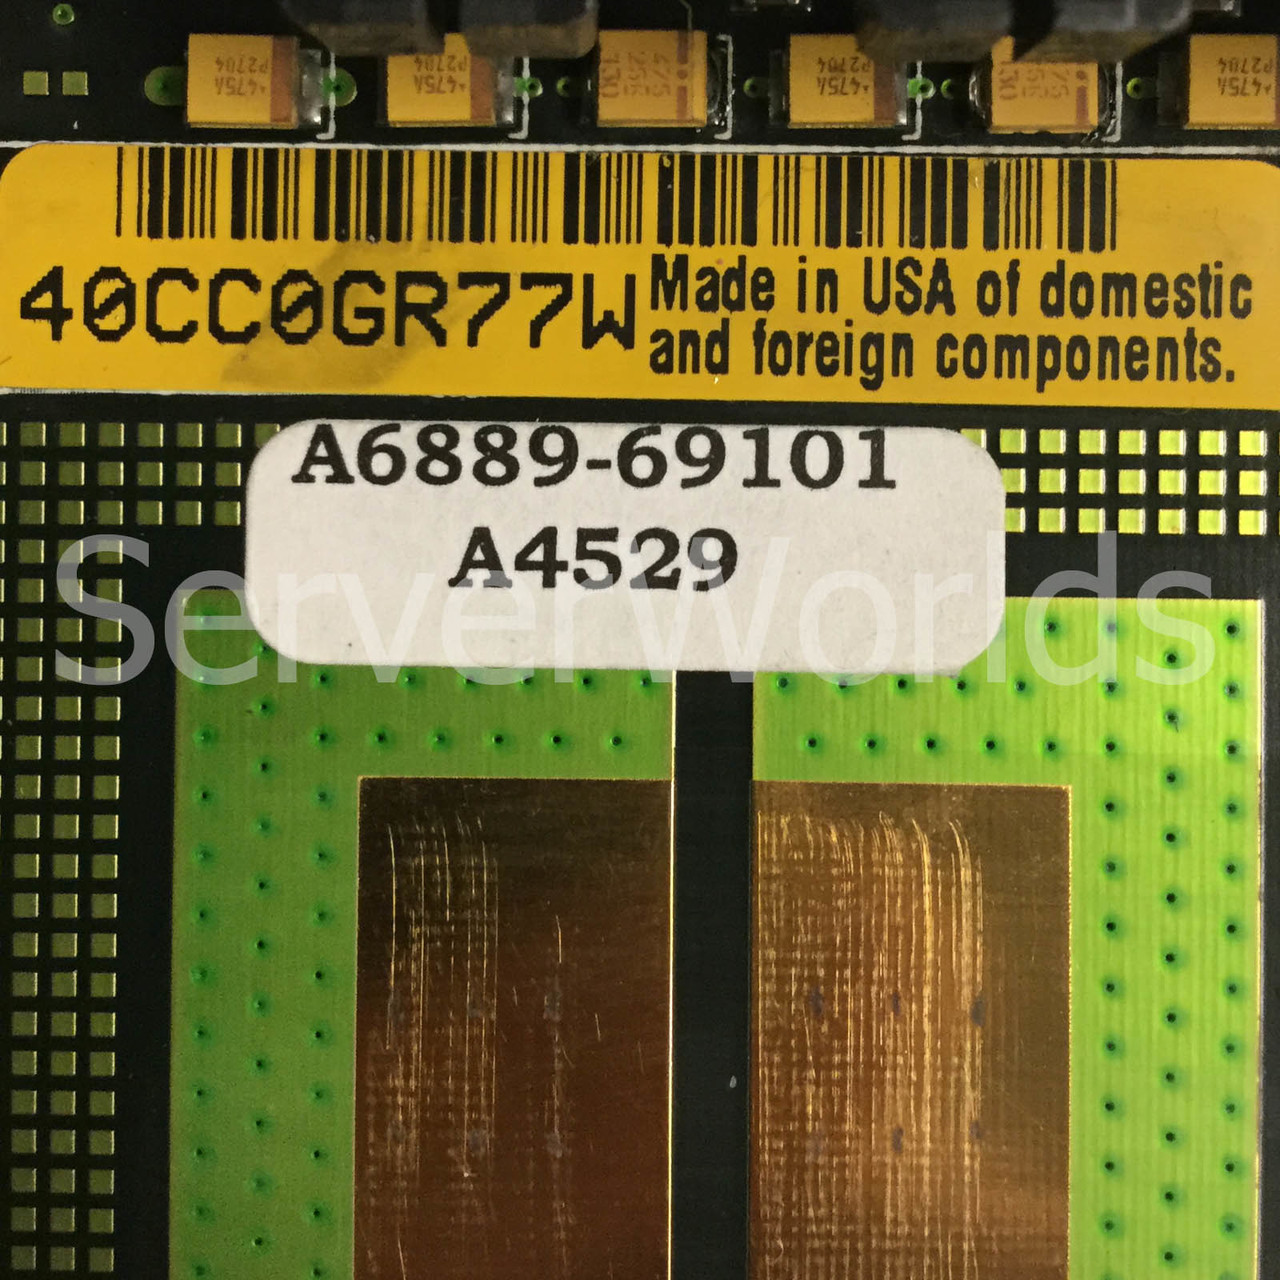 HPe A6889-69101 RP2470 System board